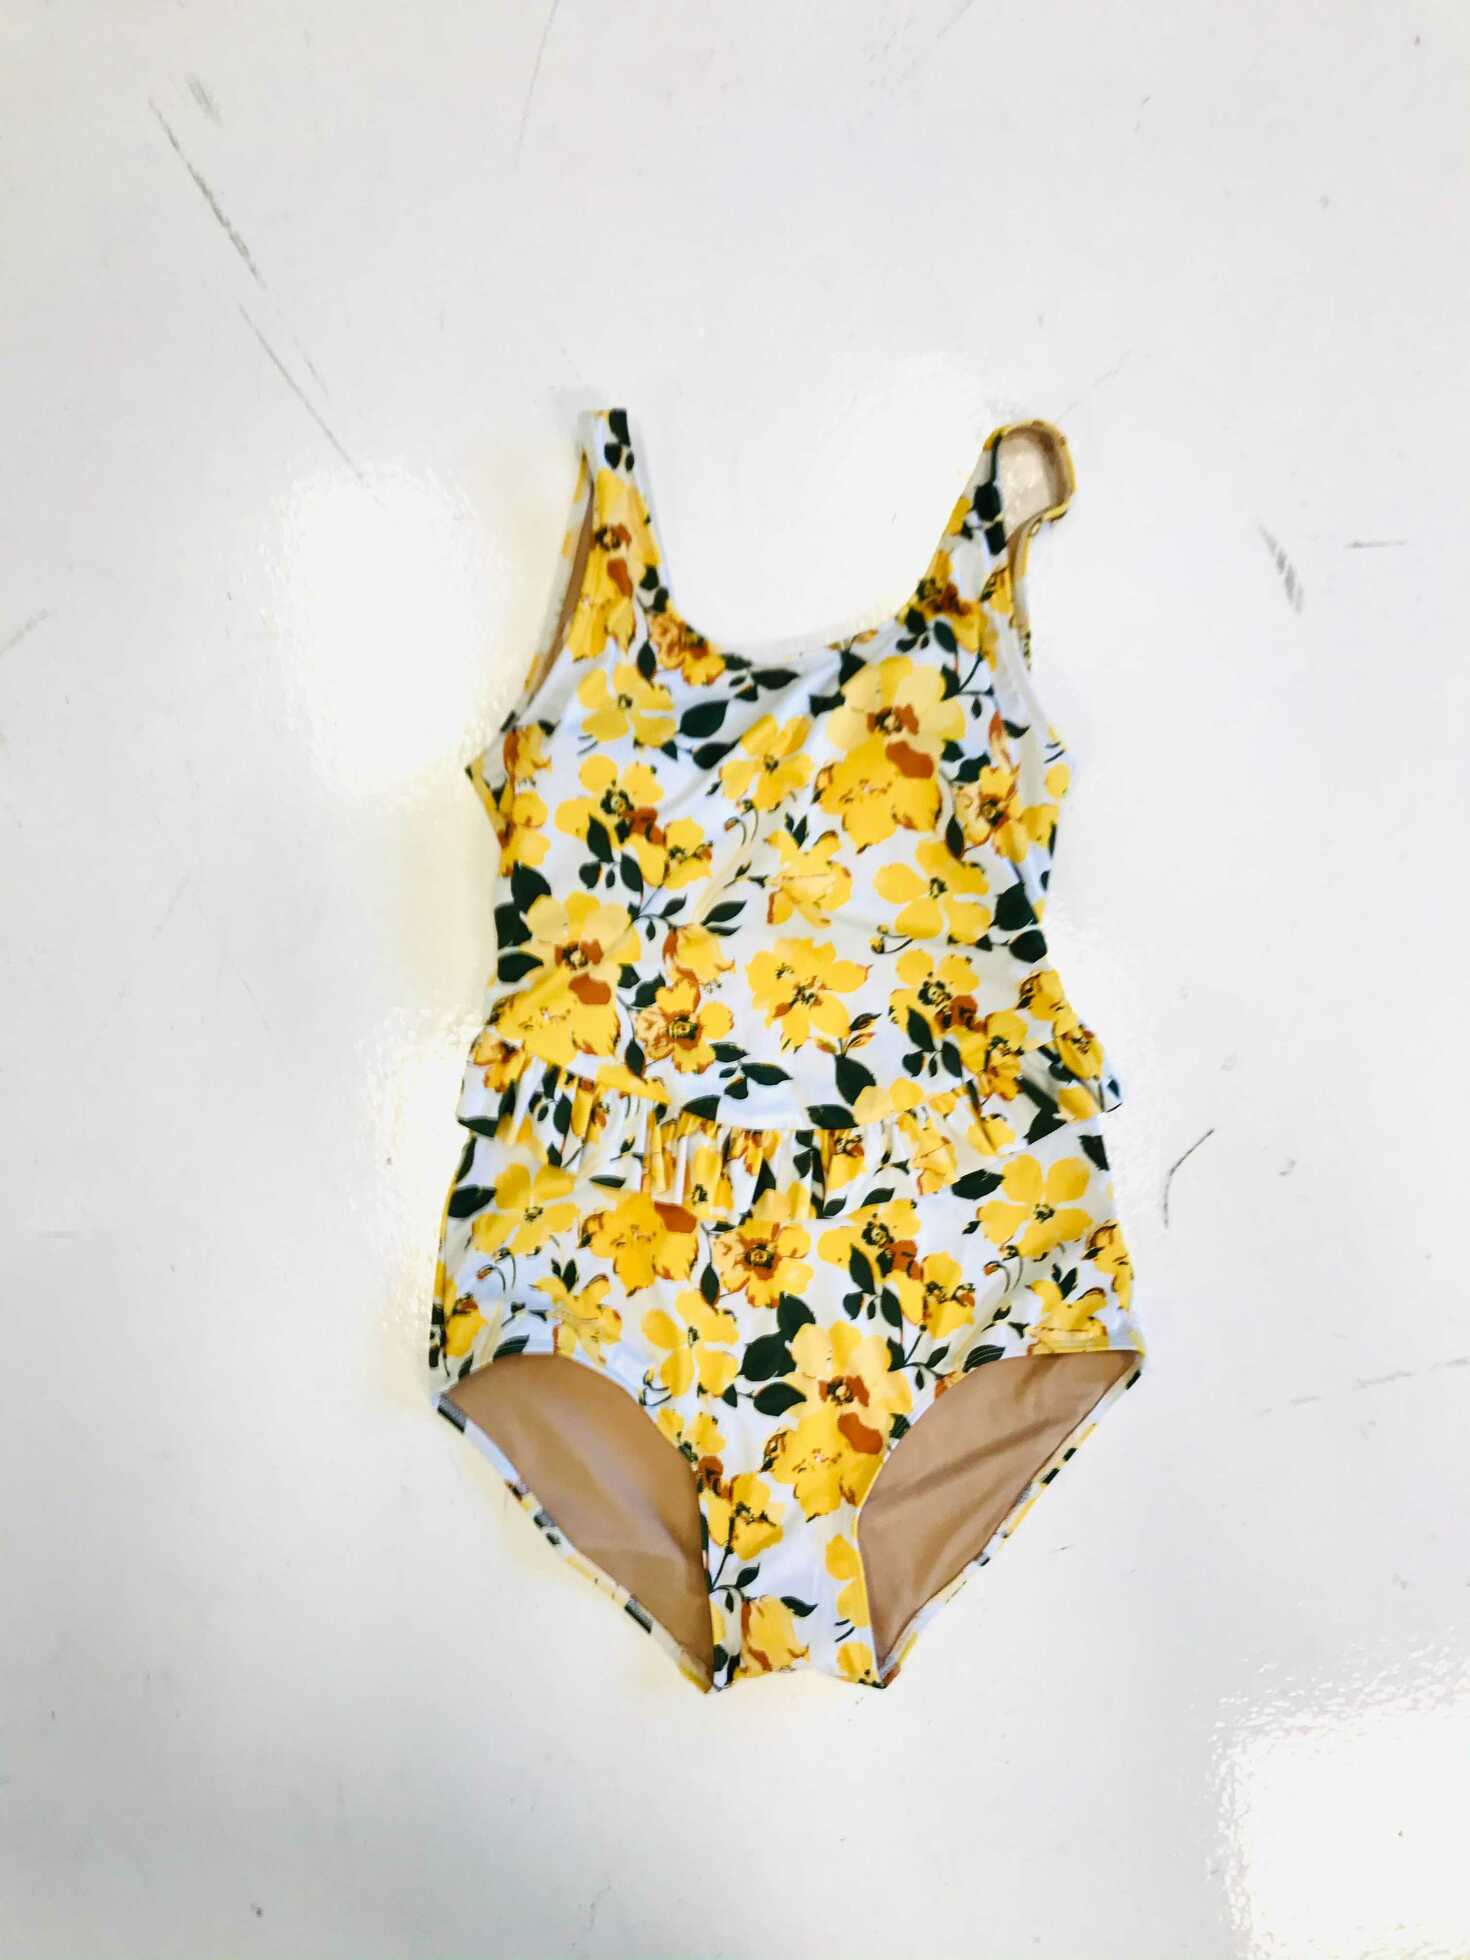 Kortni Jeane Skirted One-Piece Yellow Floral Swimsuit (Size Medium) - Room  Here